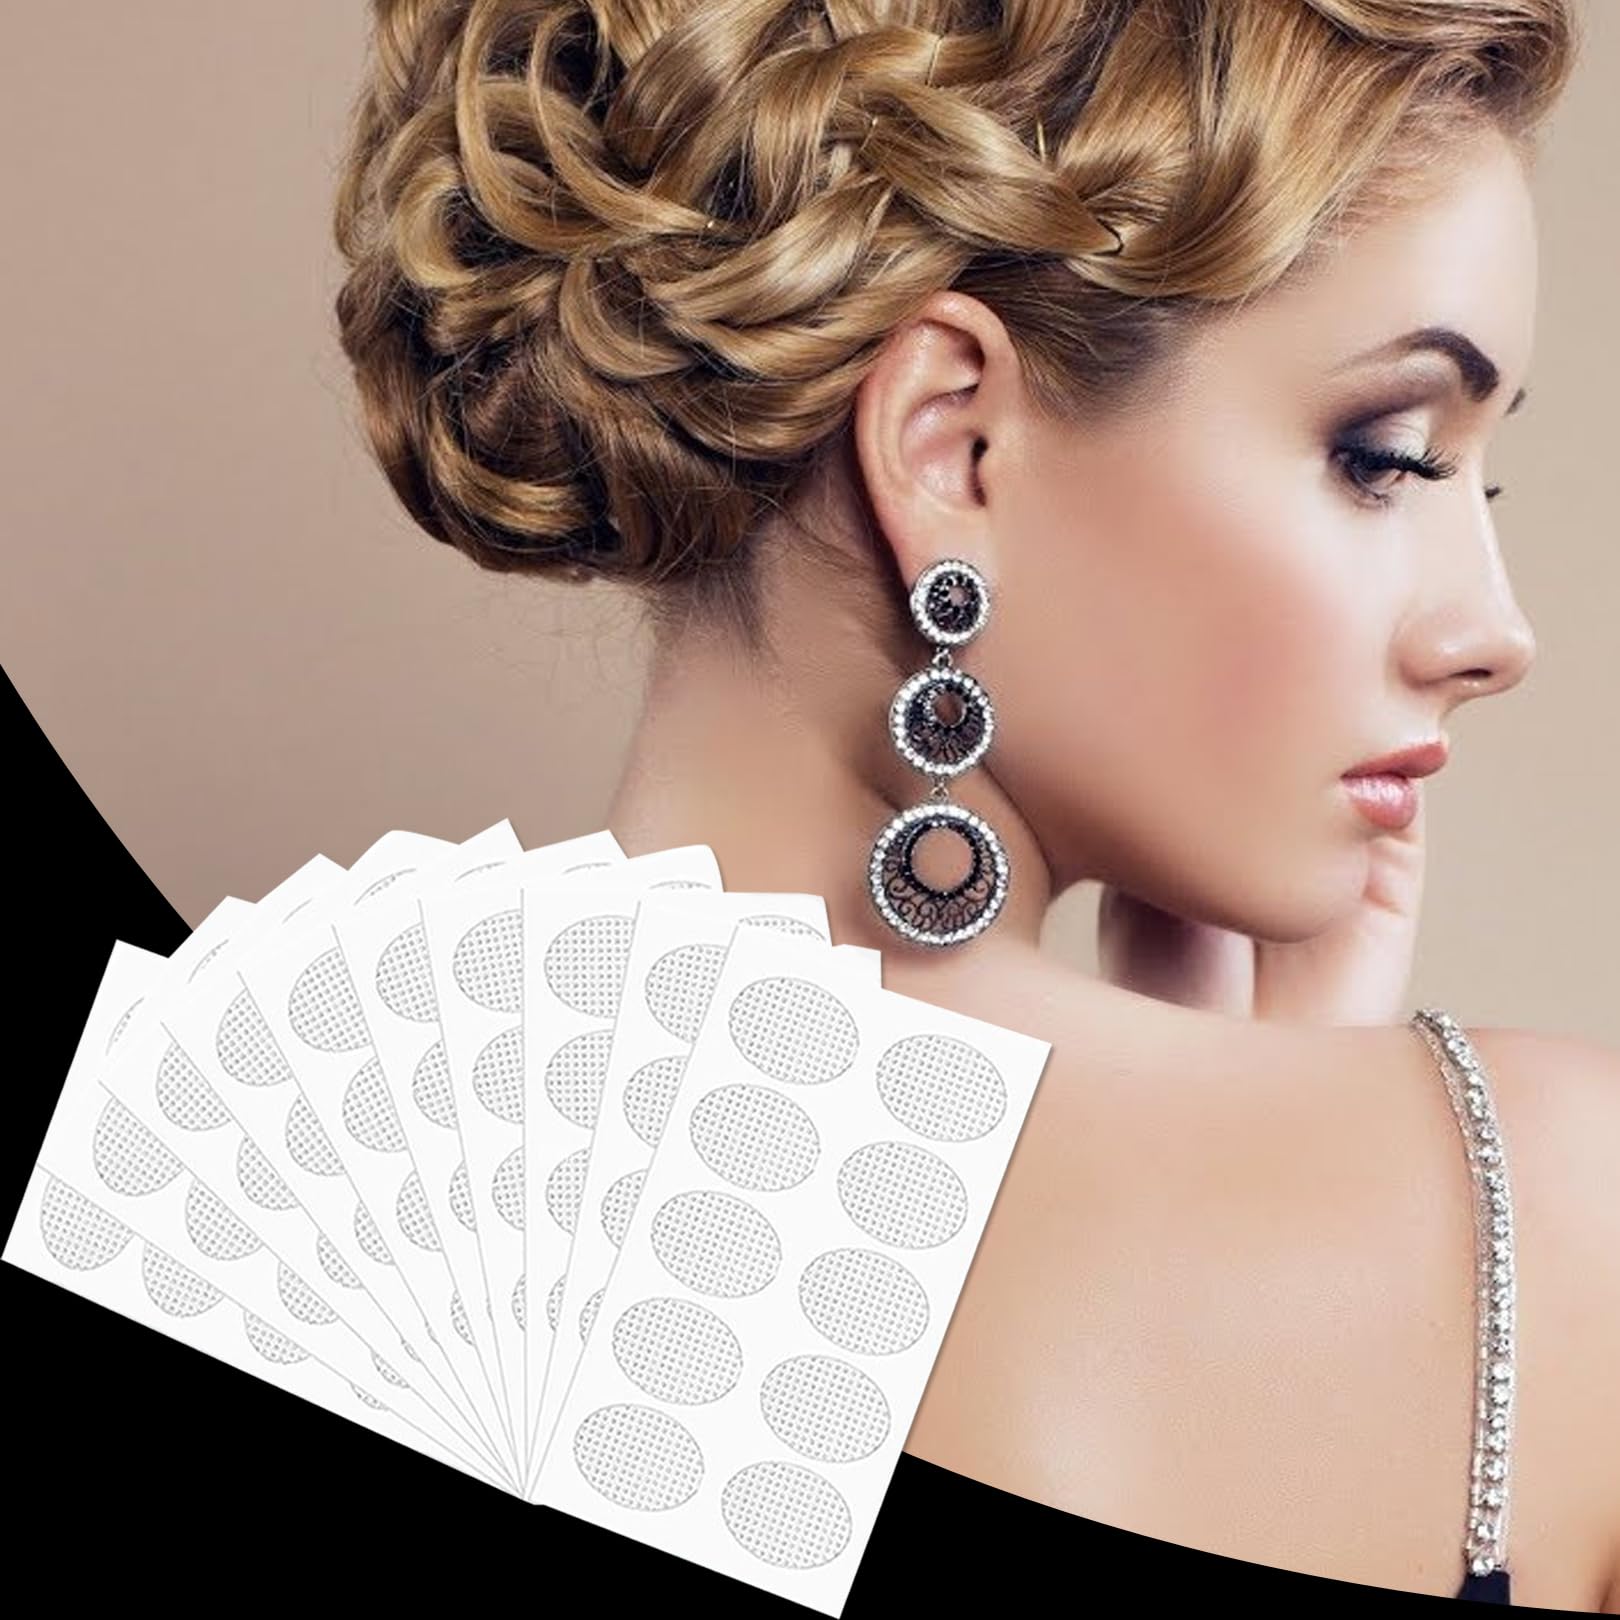 100 Pcs Breathable Earrings Support Pads,Large Earring Patches Heavy Ear Stabilizers,Invisible Earring Stickers,Earring Lobe Support Patches for Heavy Earrings for Long Time Wearing Earrings(clear)